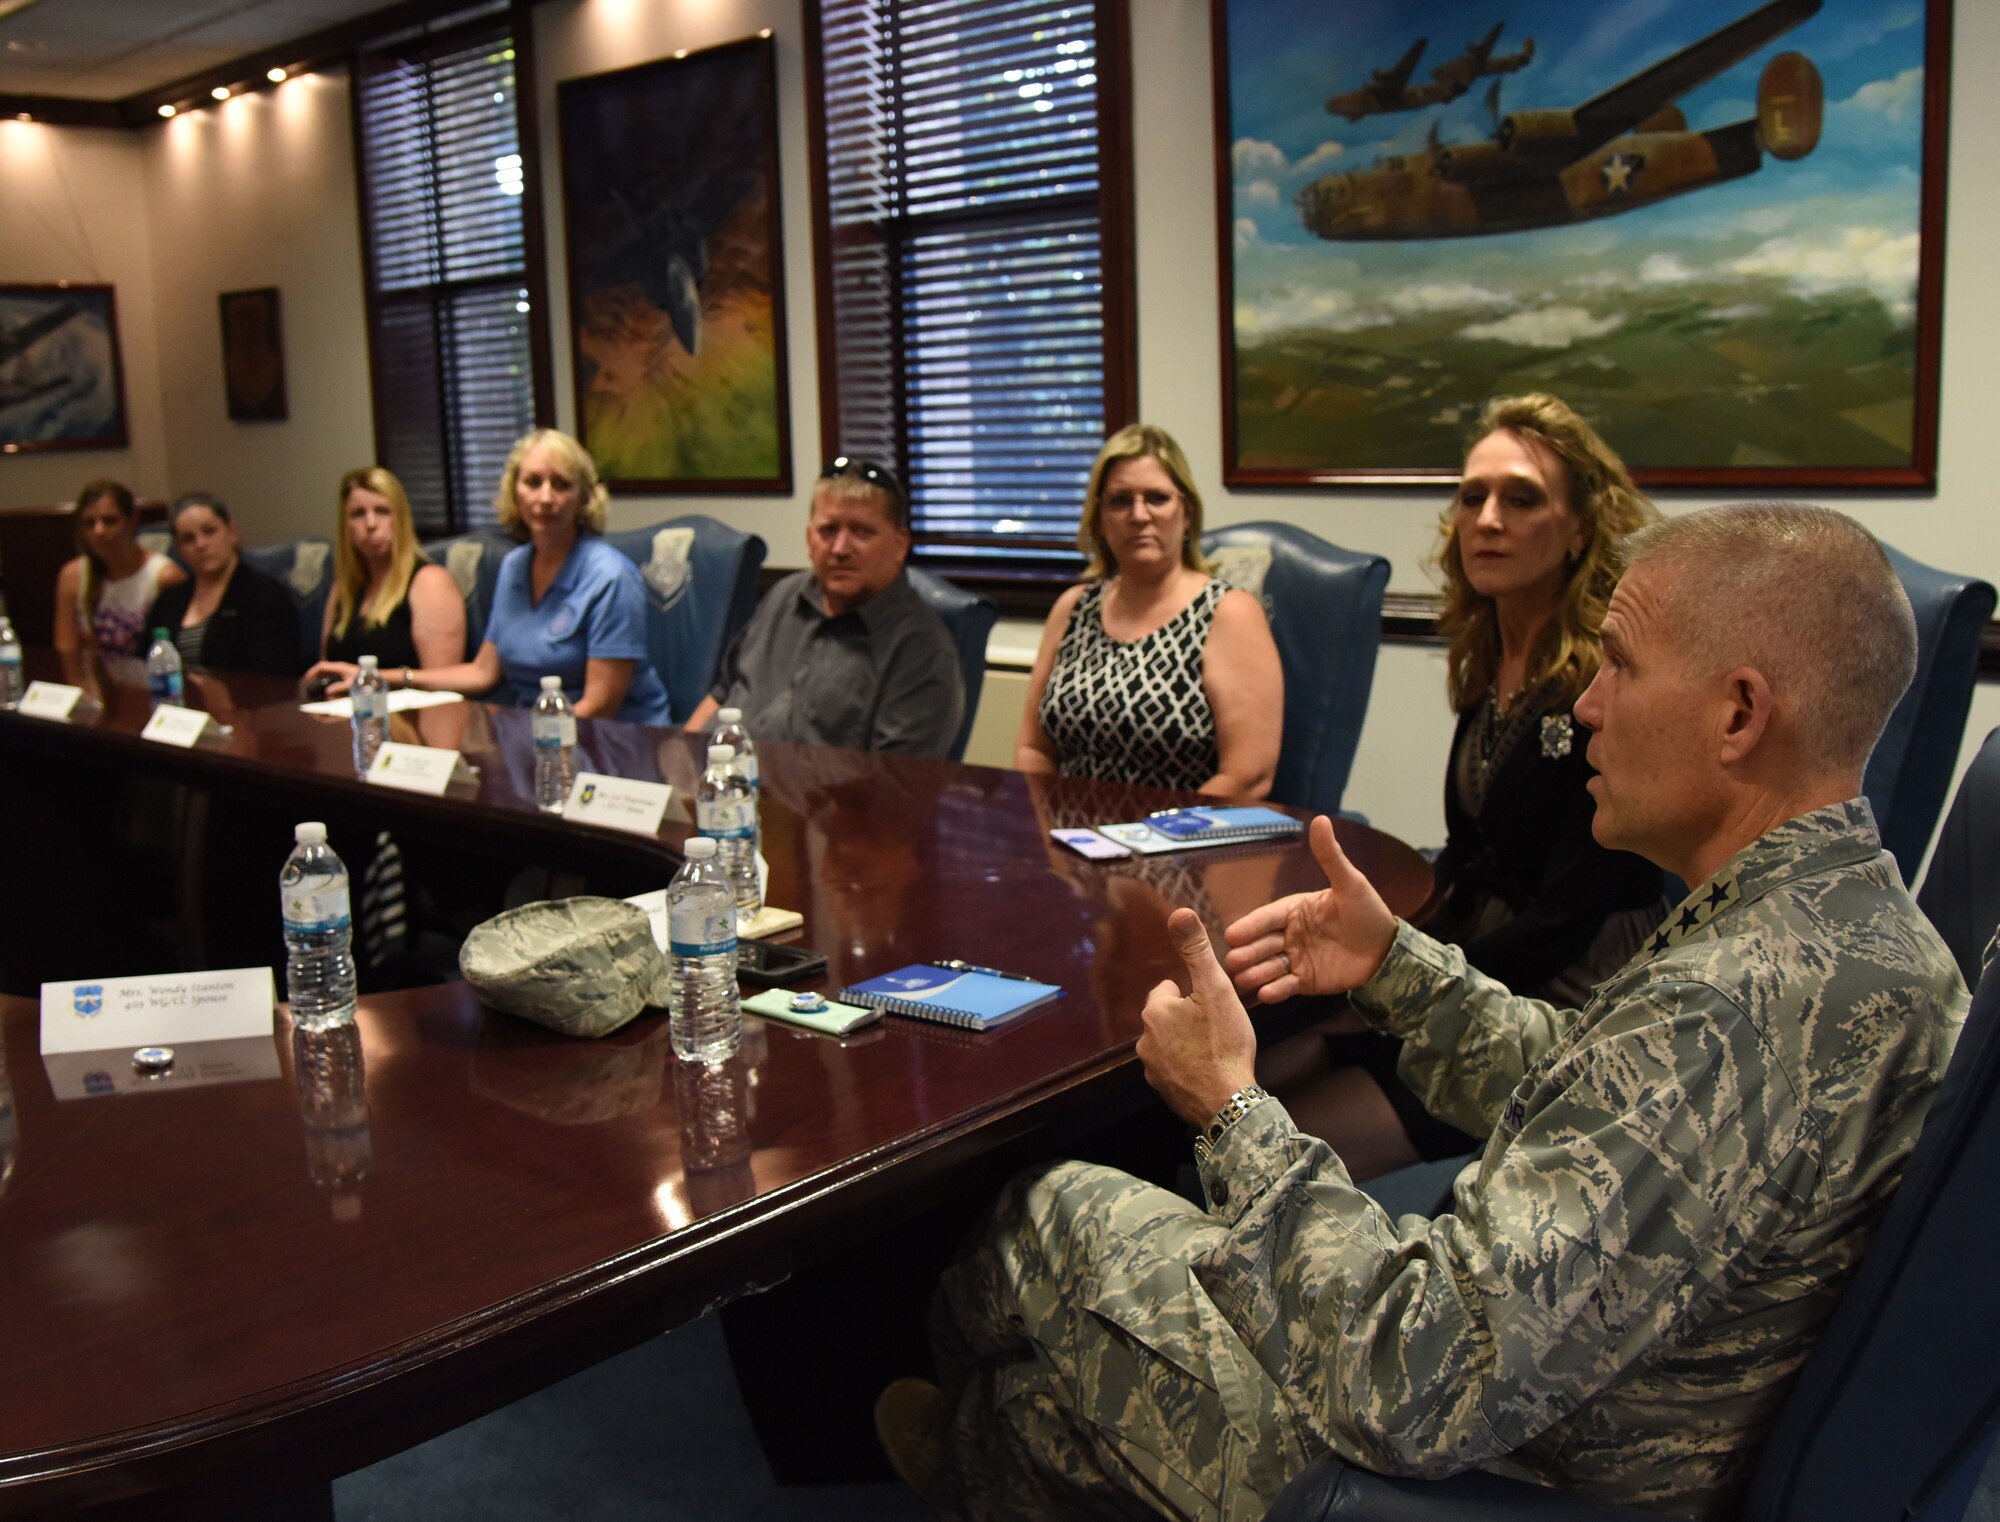 U.S. Air Force Lt. Gen. Steve Kwast, commander of Air Education and Training Command, speaks during a meet and greet session with Keesler’s Key Spouss at the 81st Training Wing headquarters building at Keesler Air Force Base, Mississippi, May 18, 2018. The meeting was held to discuss the key spouse program benefits and how to increase involvement. (U.S. Air Force photo by Kemberly Groue)